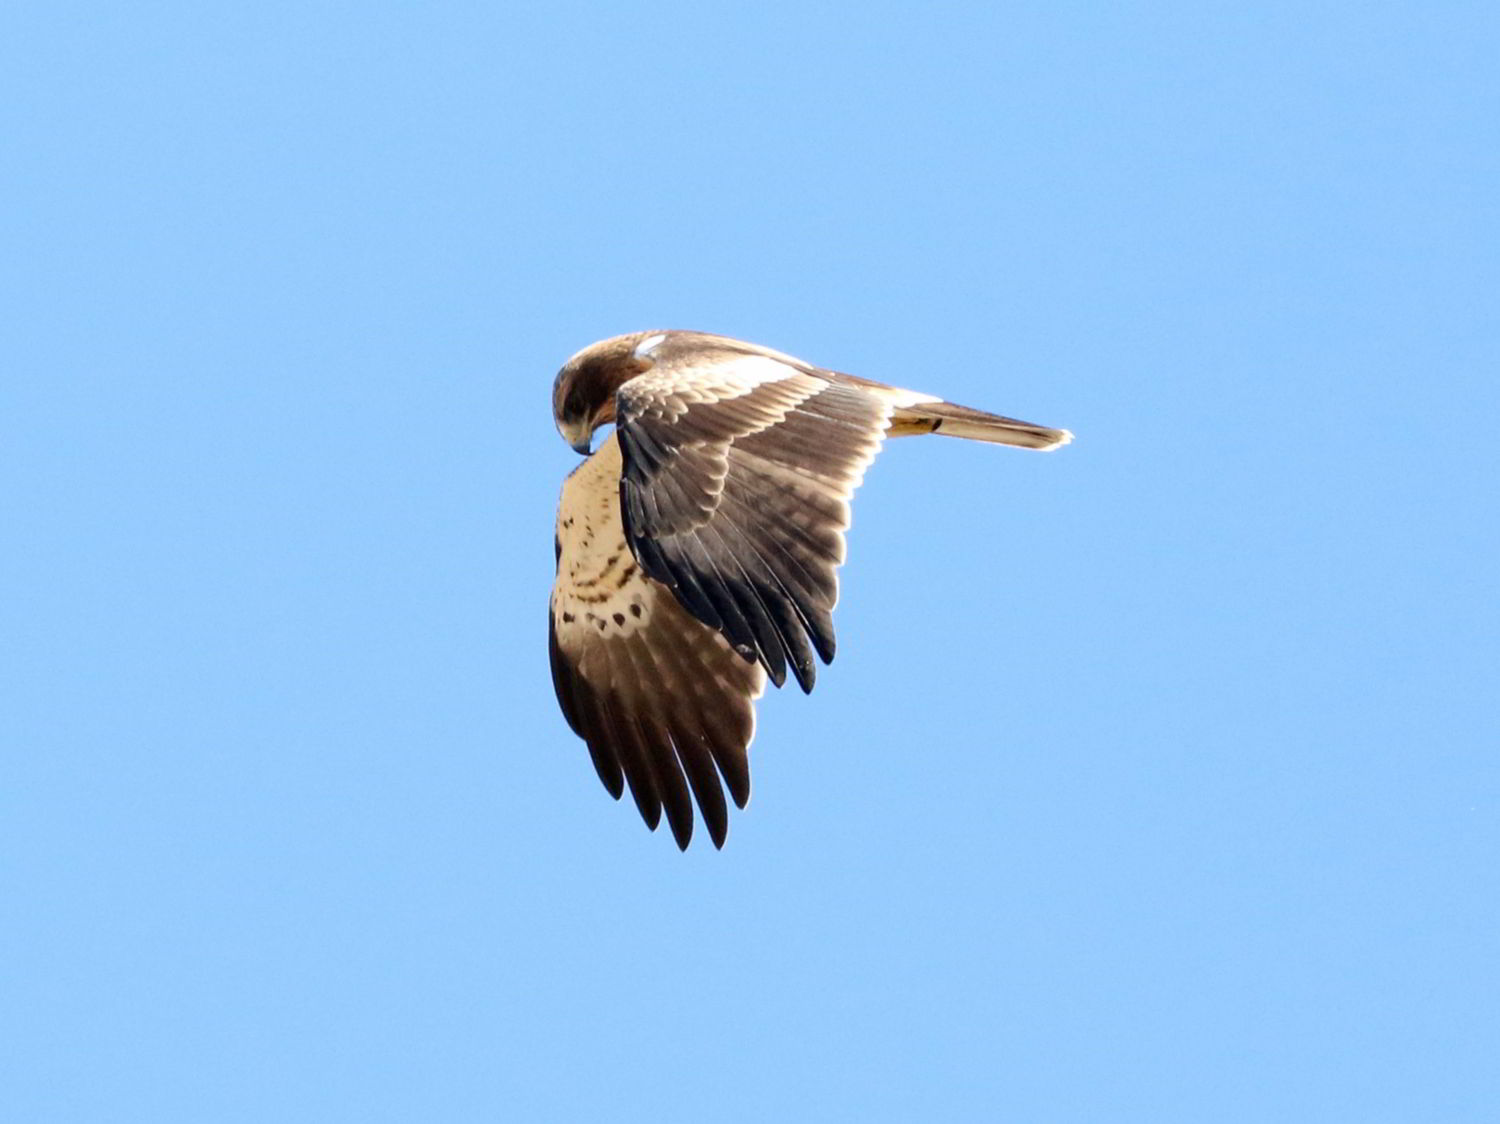 Booted Eagle hovering in a blue sky, Portugal